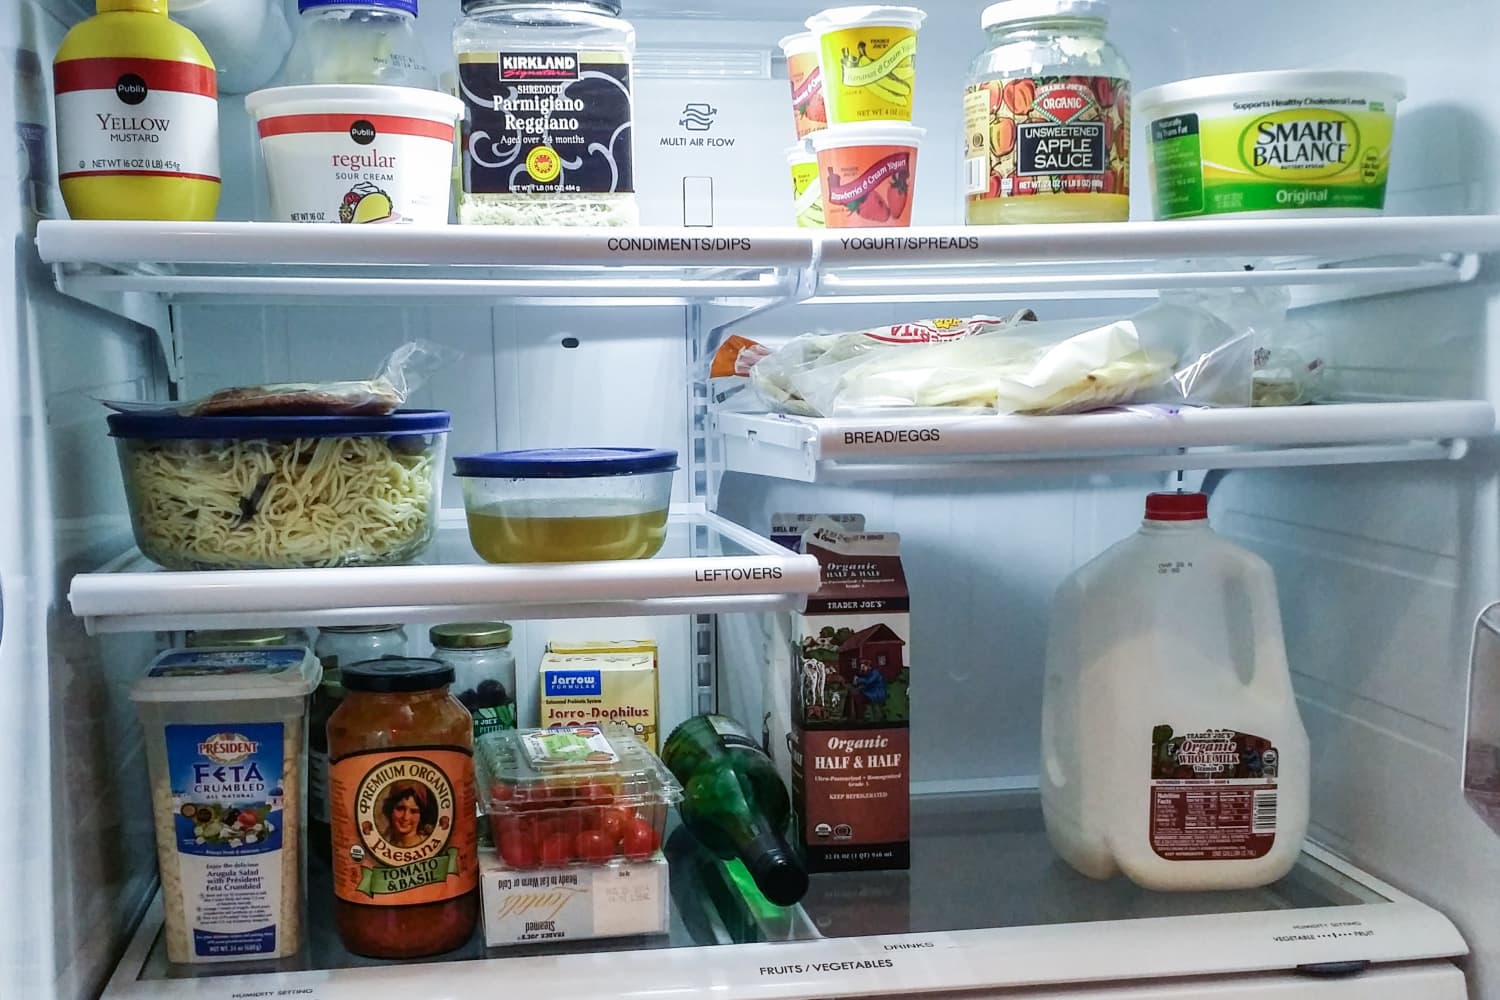 How to Clean a Fridge With Household Items